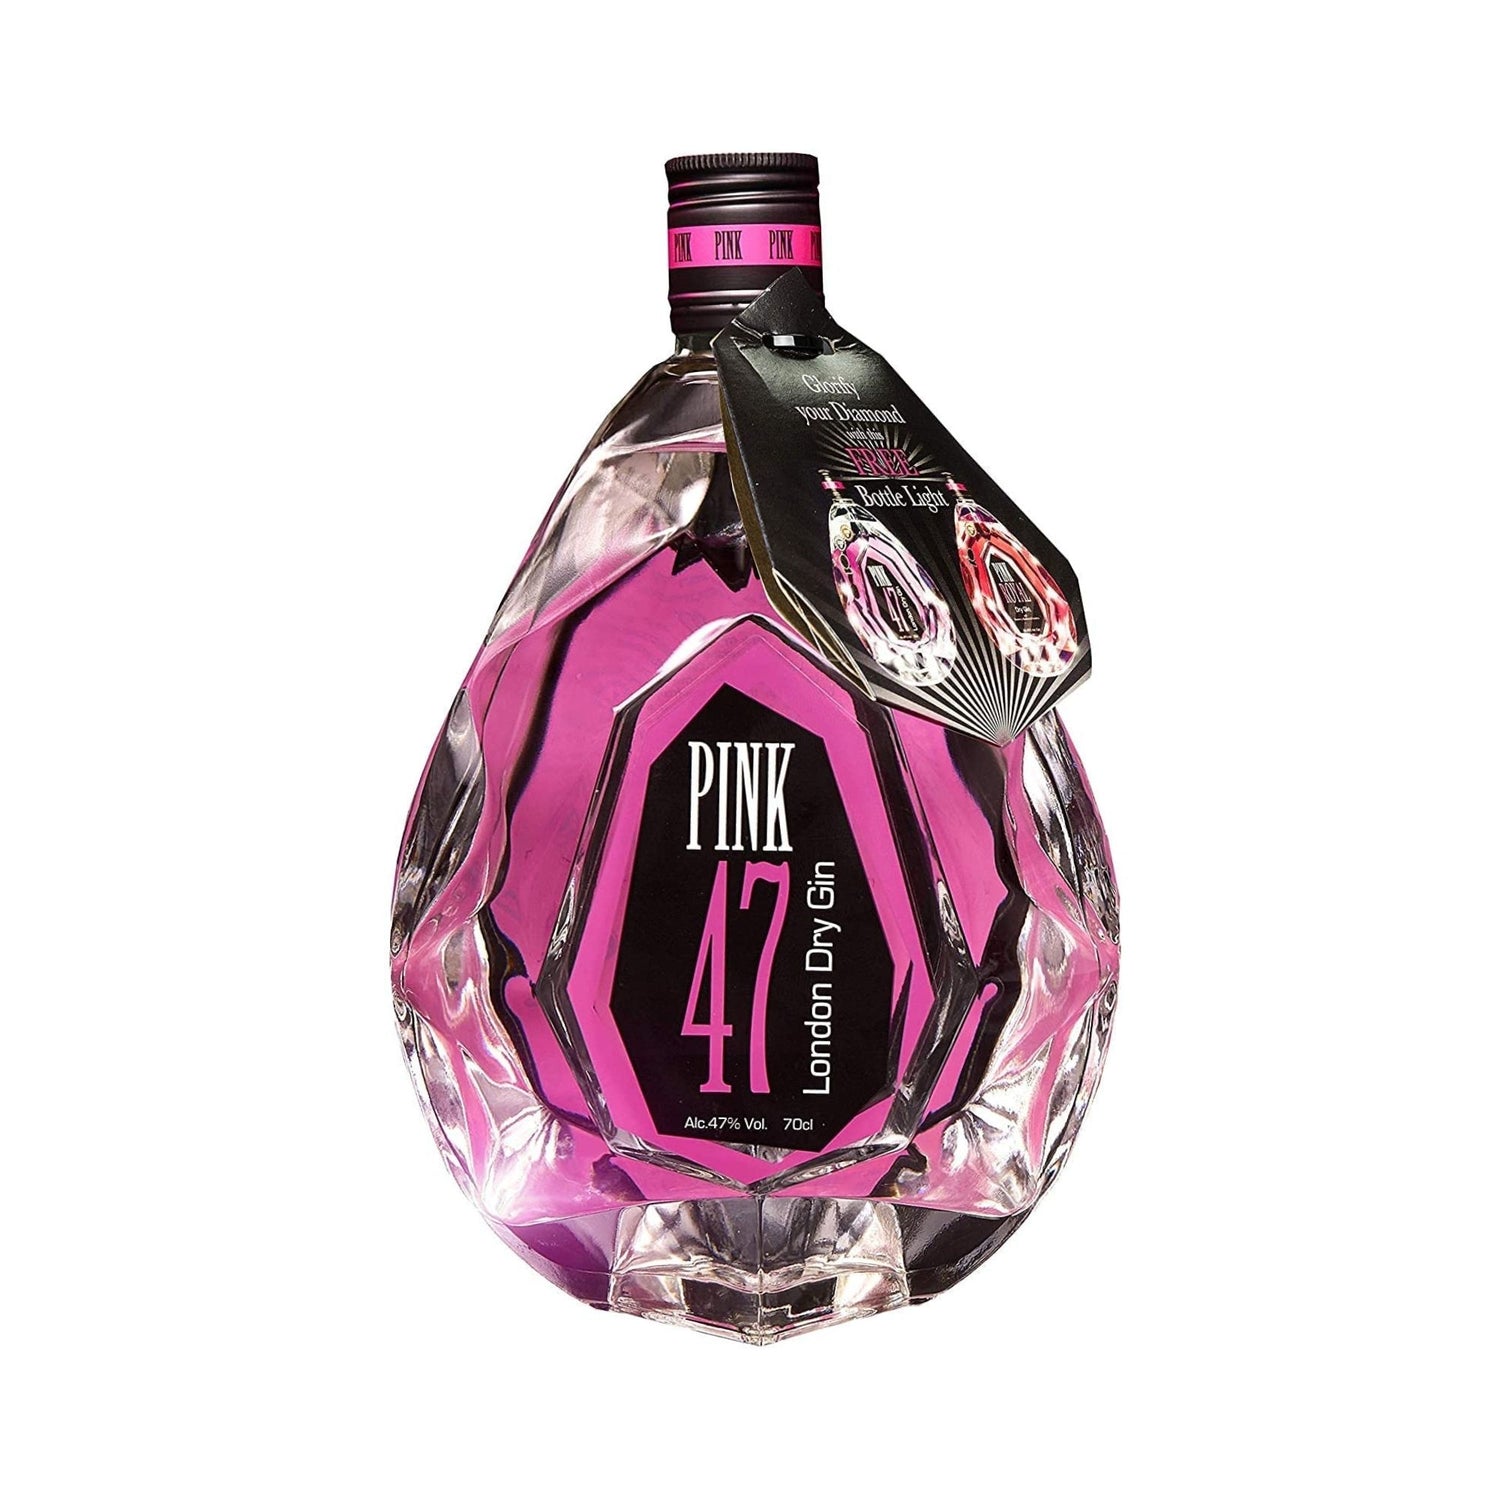 PINK 47 LONDON DRY GIN 07TL